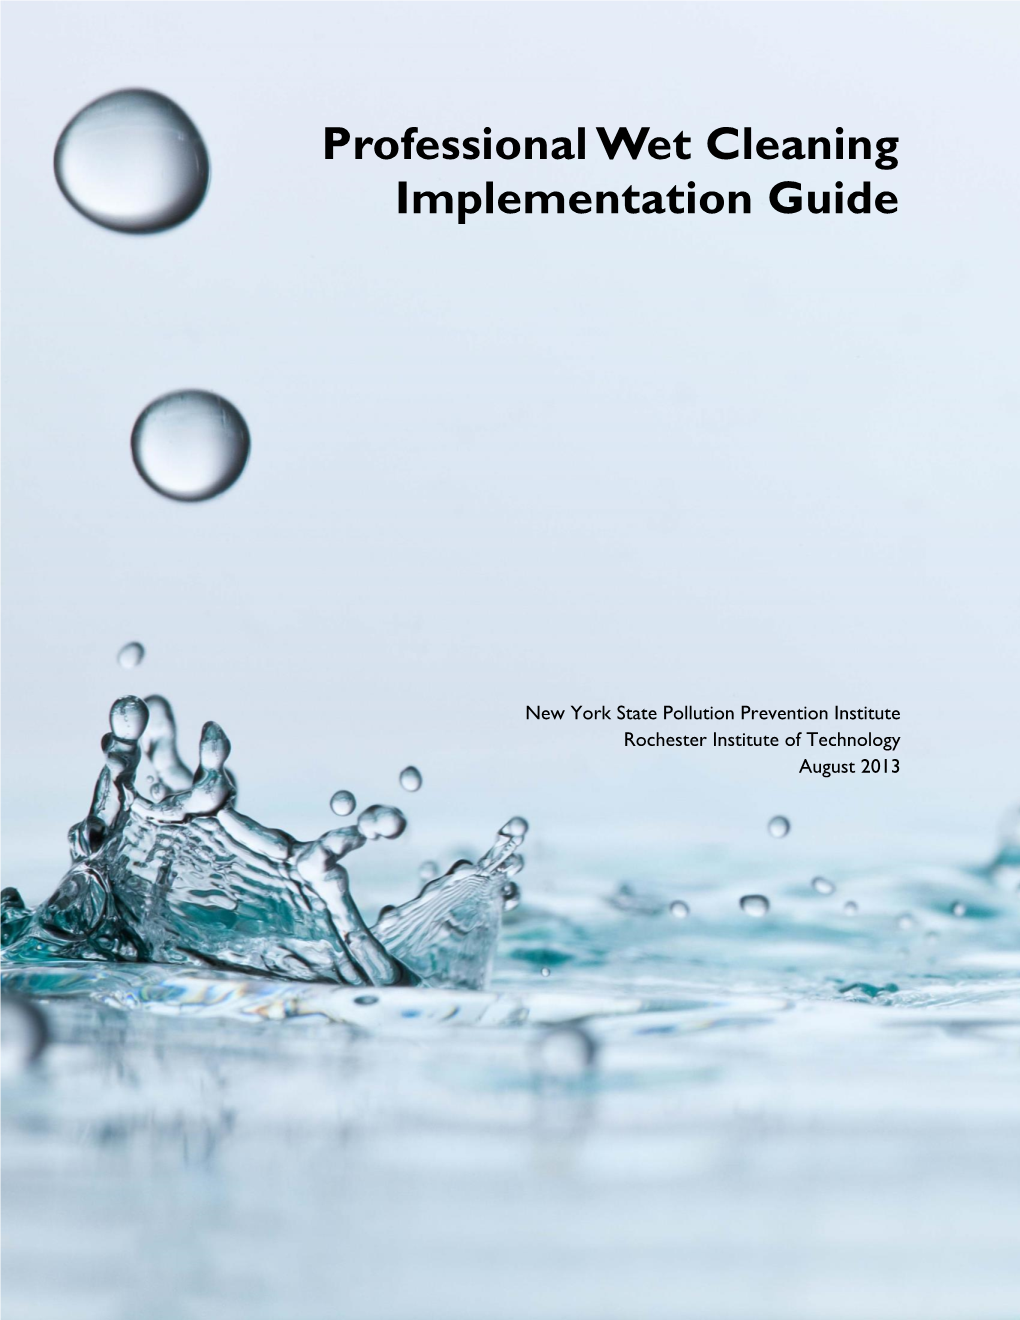 Professional Wet Cleaning Implementation Guide